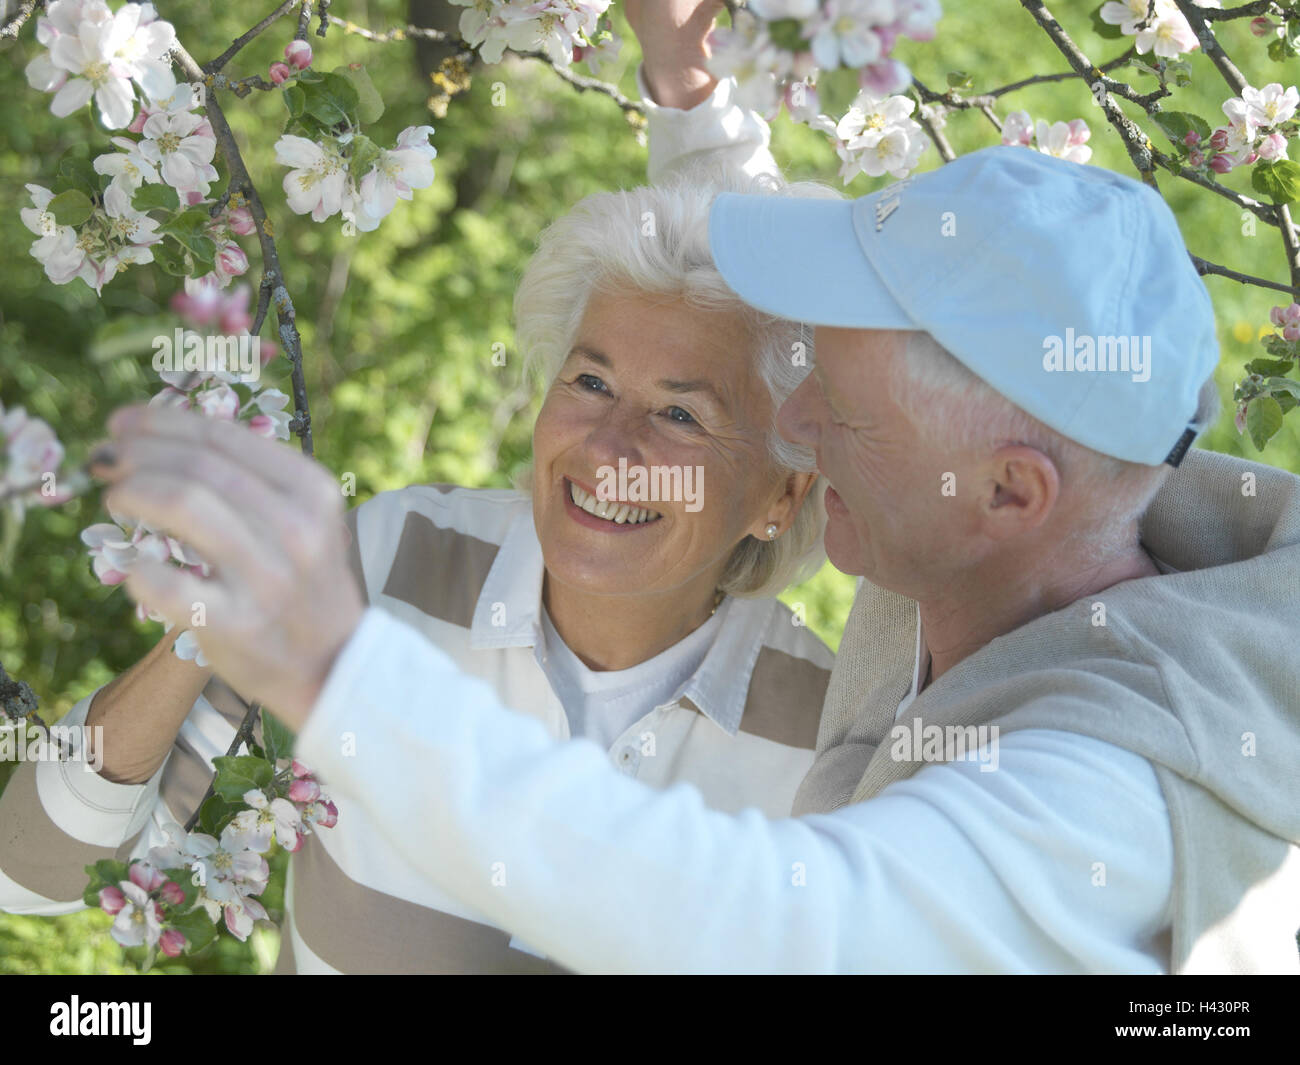 Garden, senior citizen's couple, happily, portrait, look, blossoms, apple-tree, spring, vacation, summer vacation, retirement, pension, leisure time, walk, détente, rest, enjoy, nature, together, together, Best of all Age, old person, senior citizens, couple, happily, contently, young remaining, fit, agile, actively, view, tree, fruit-tree, blossoms, blossom, odour, smell, joy, symbolically, renewal, spring feelings, vitality, life energy, future, life, partnership, love, affection, common characteristic, togetherness, cohesion, liveliness, enthusiasm, tuning positively, attitude to life, joy Stock Photo